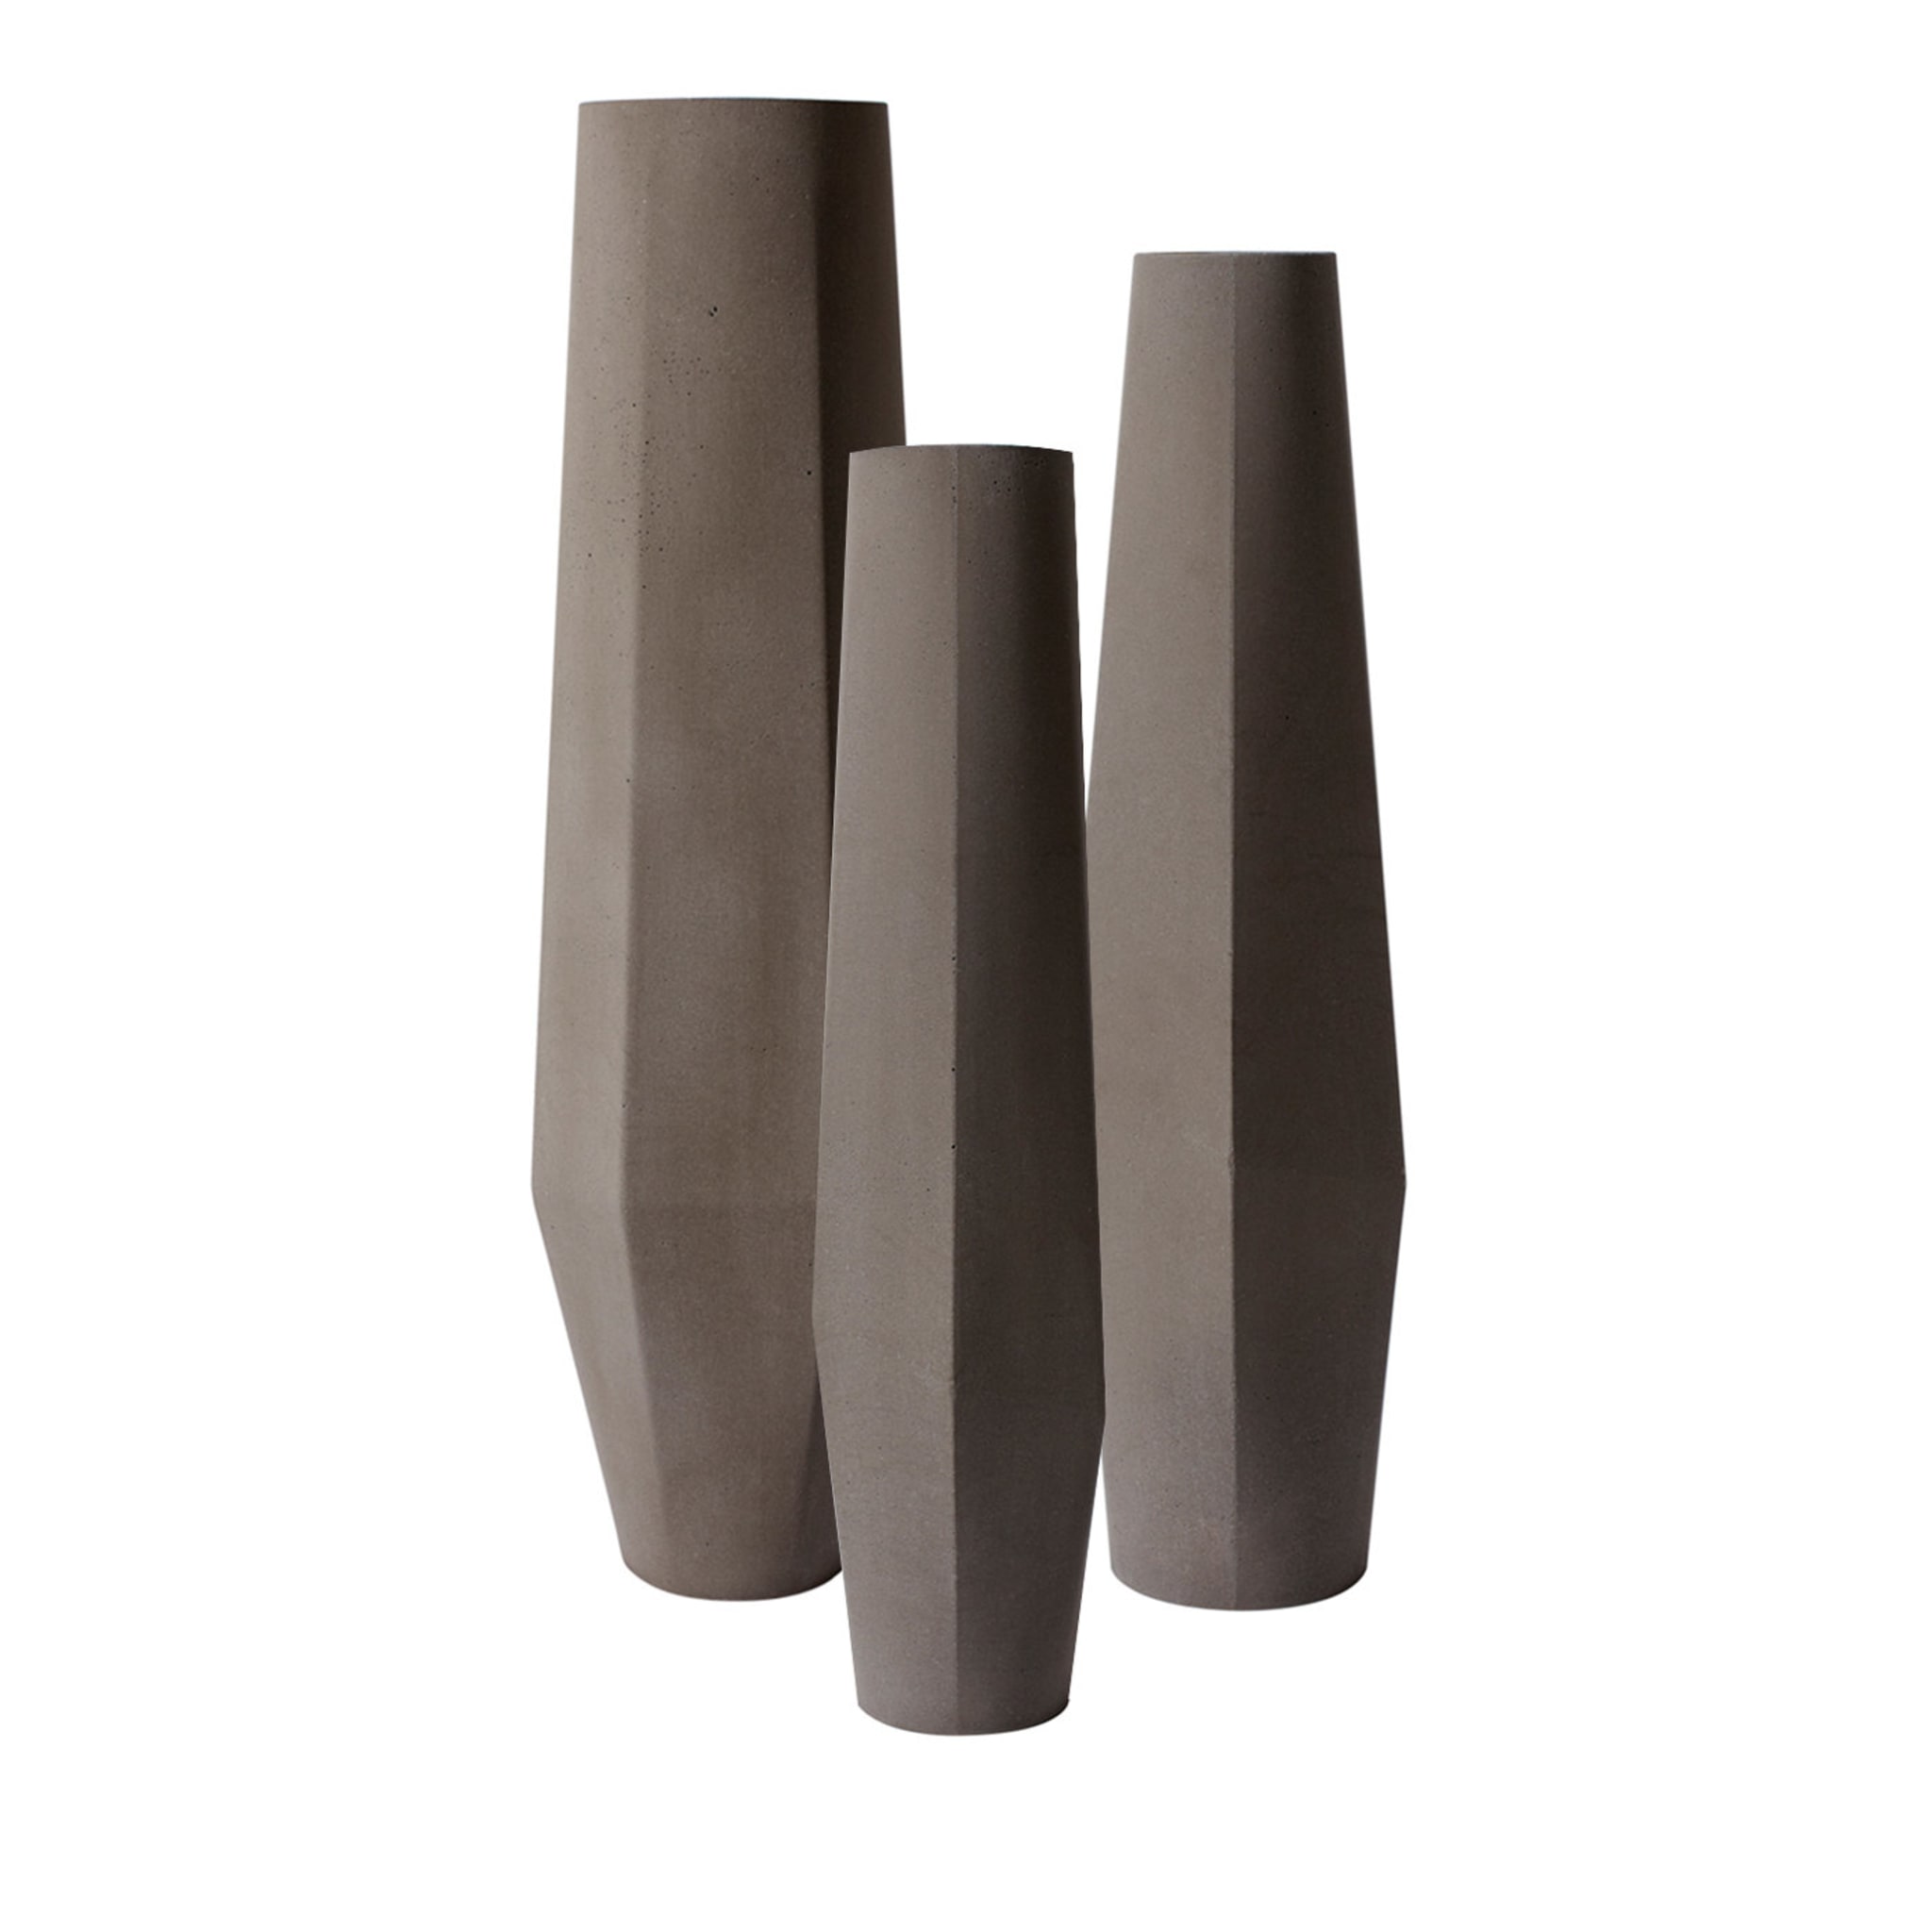 Marchigüe Gray Vase Set of 3  - Main view